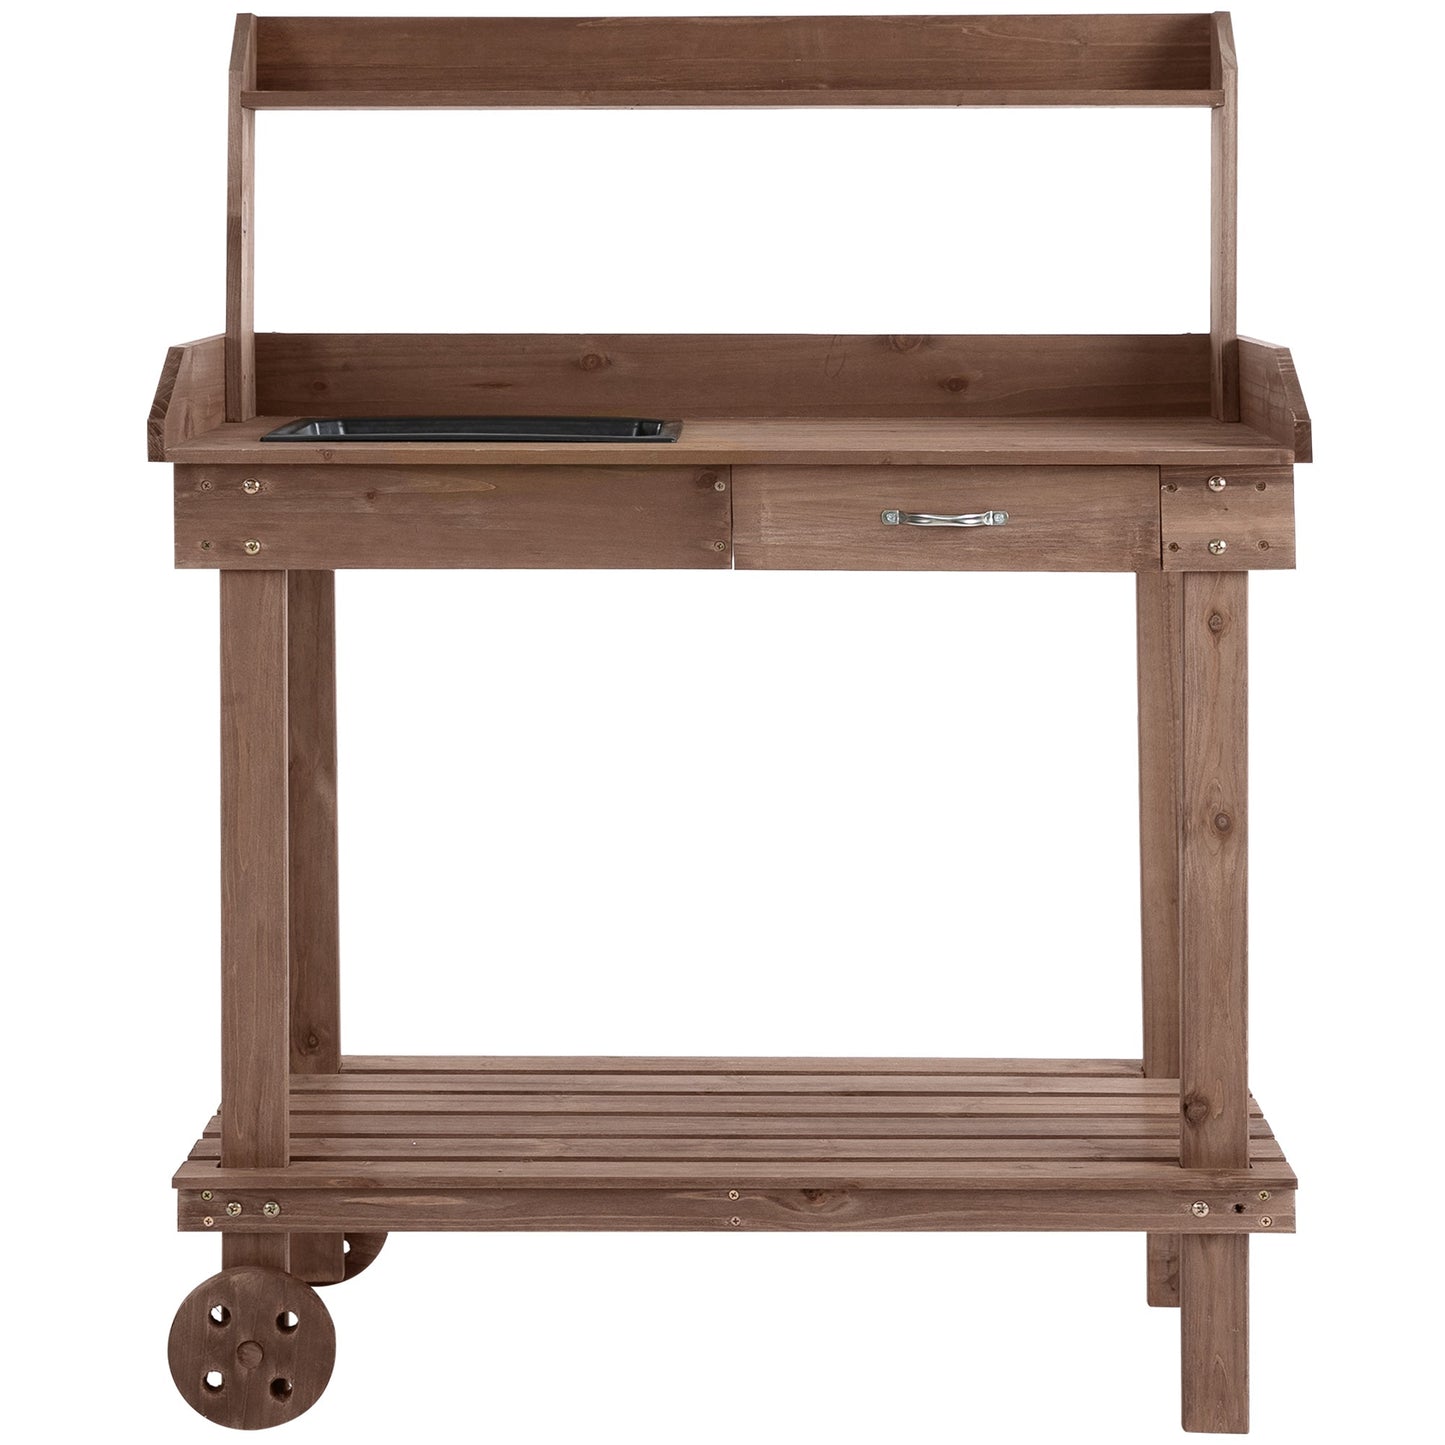 -Outsunny 36'' Wooden Potting Bench Work Table with 2 Removable Wheels, Sink, Drawer & Large Storage Spaces, Brown - Outdoor Style Company